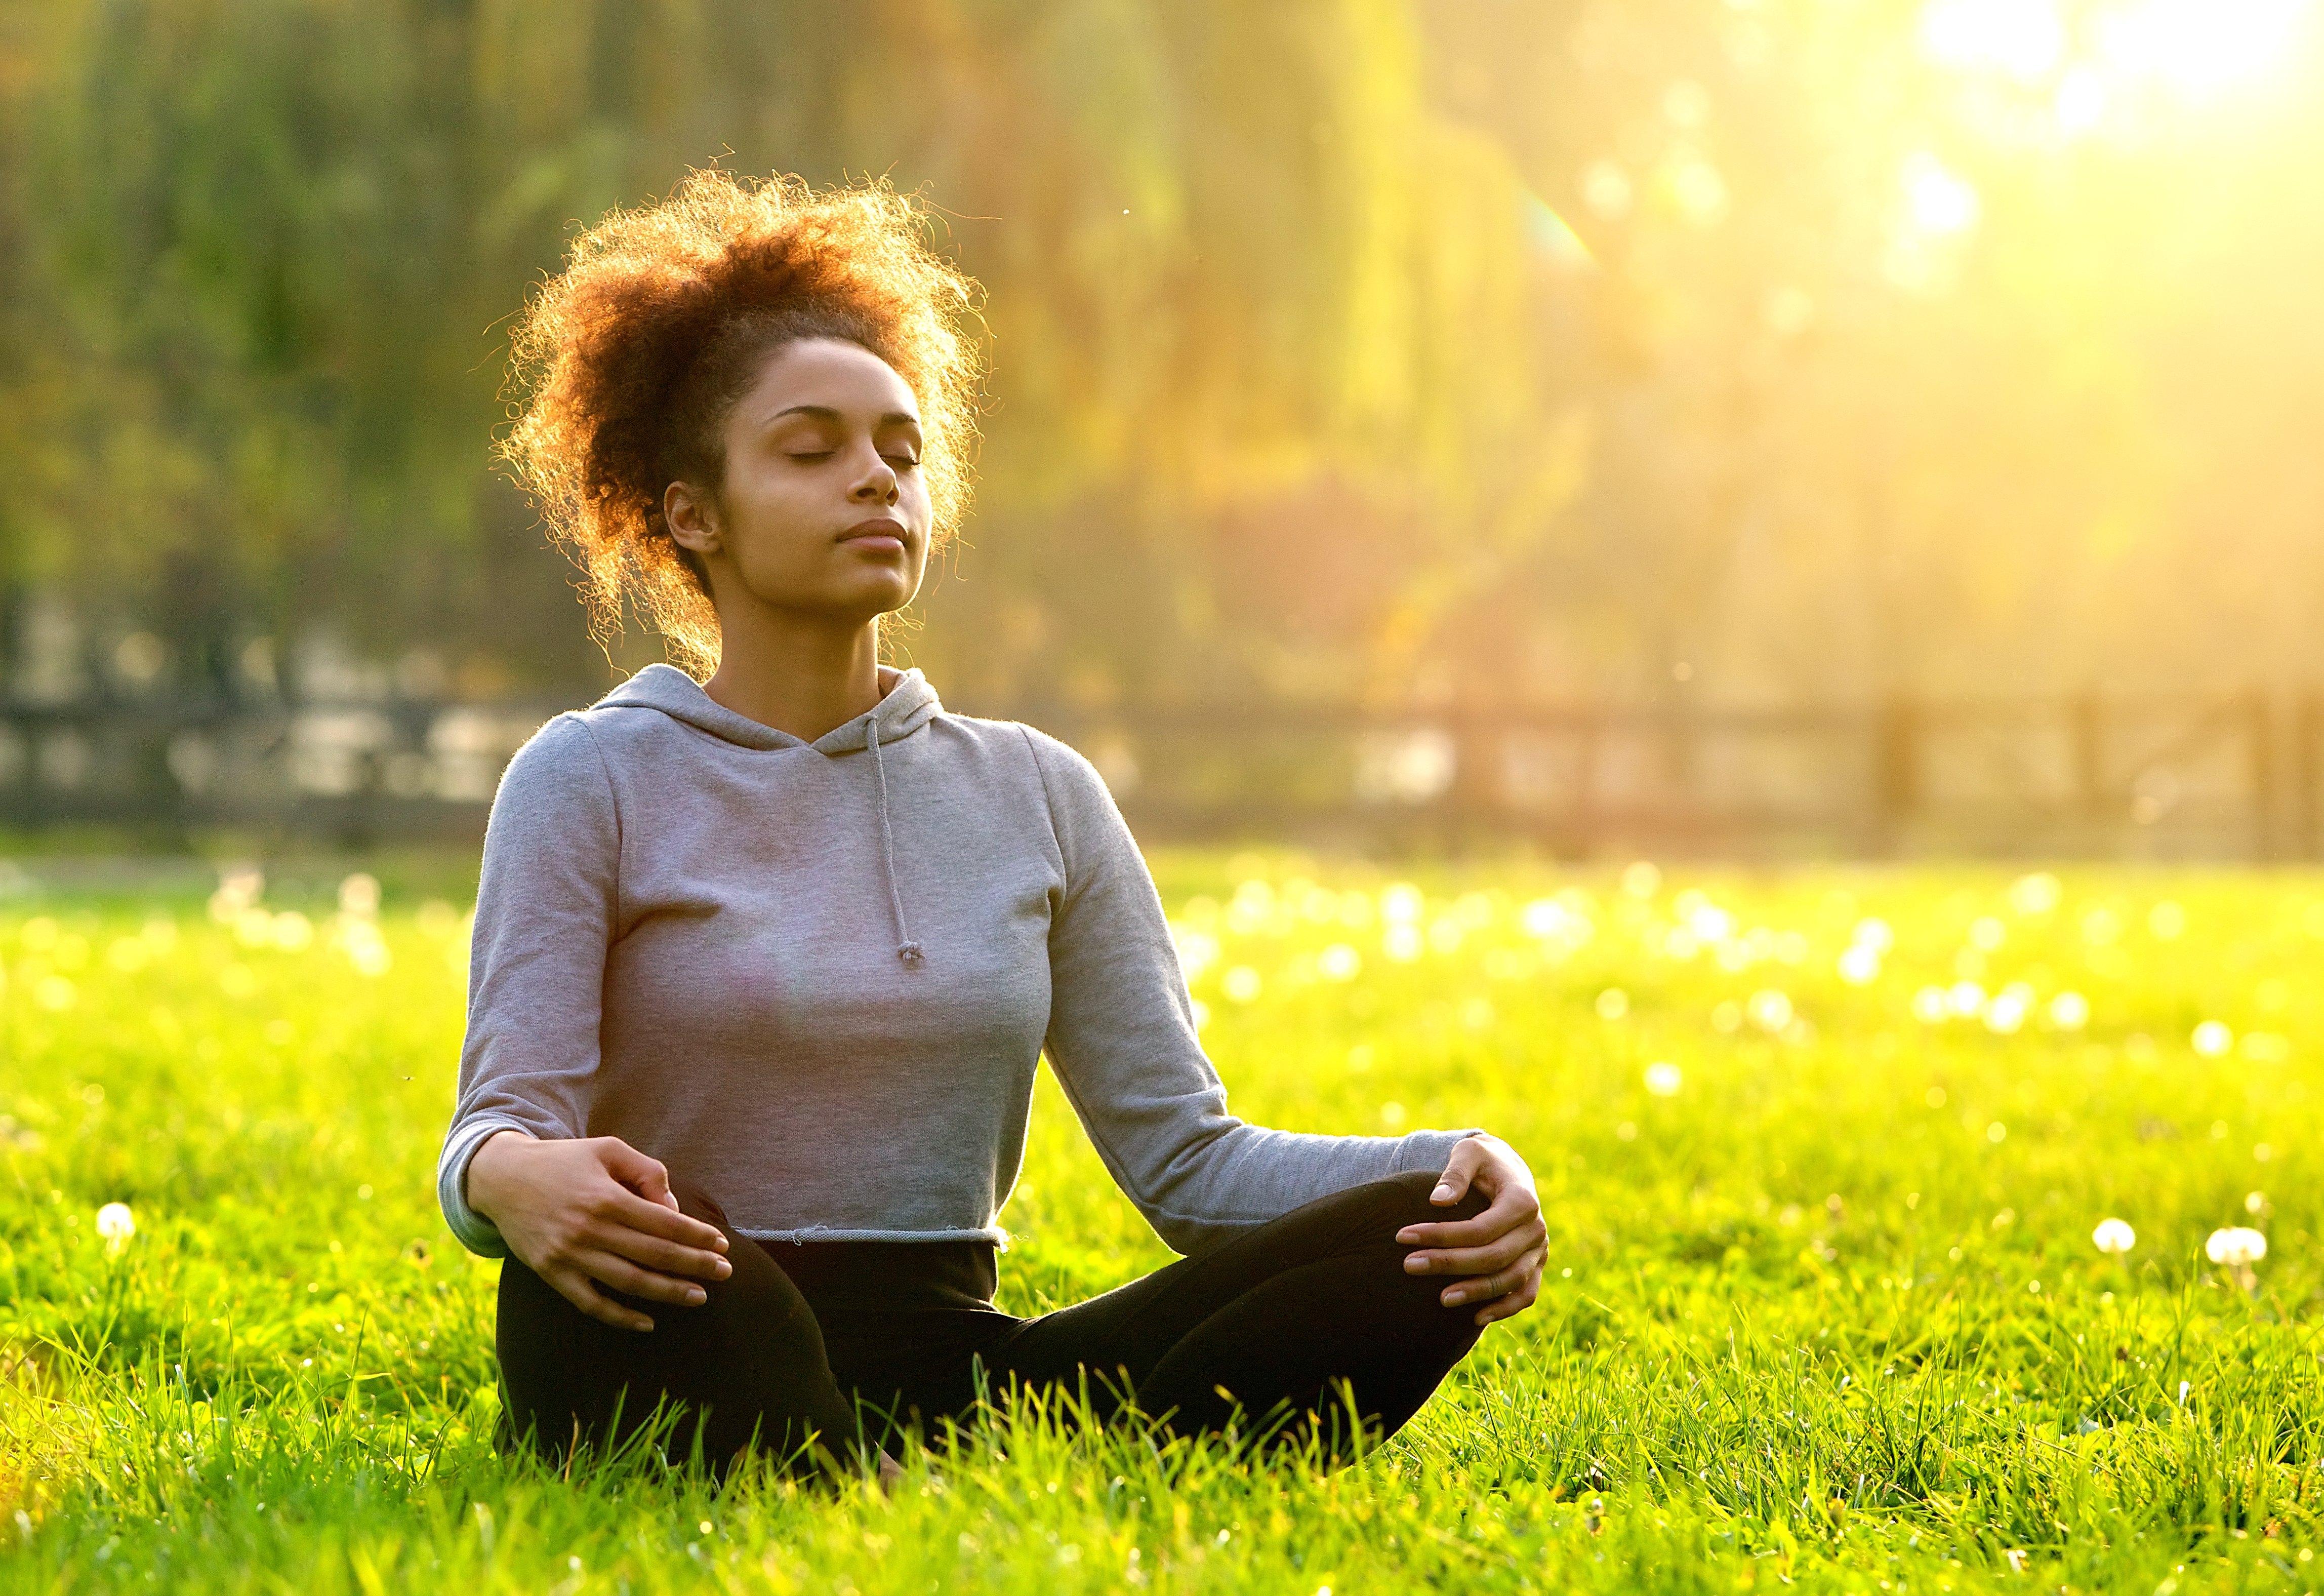 How to Meditate—and Why You Should (Even If You're Skeptical) | Greatist